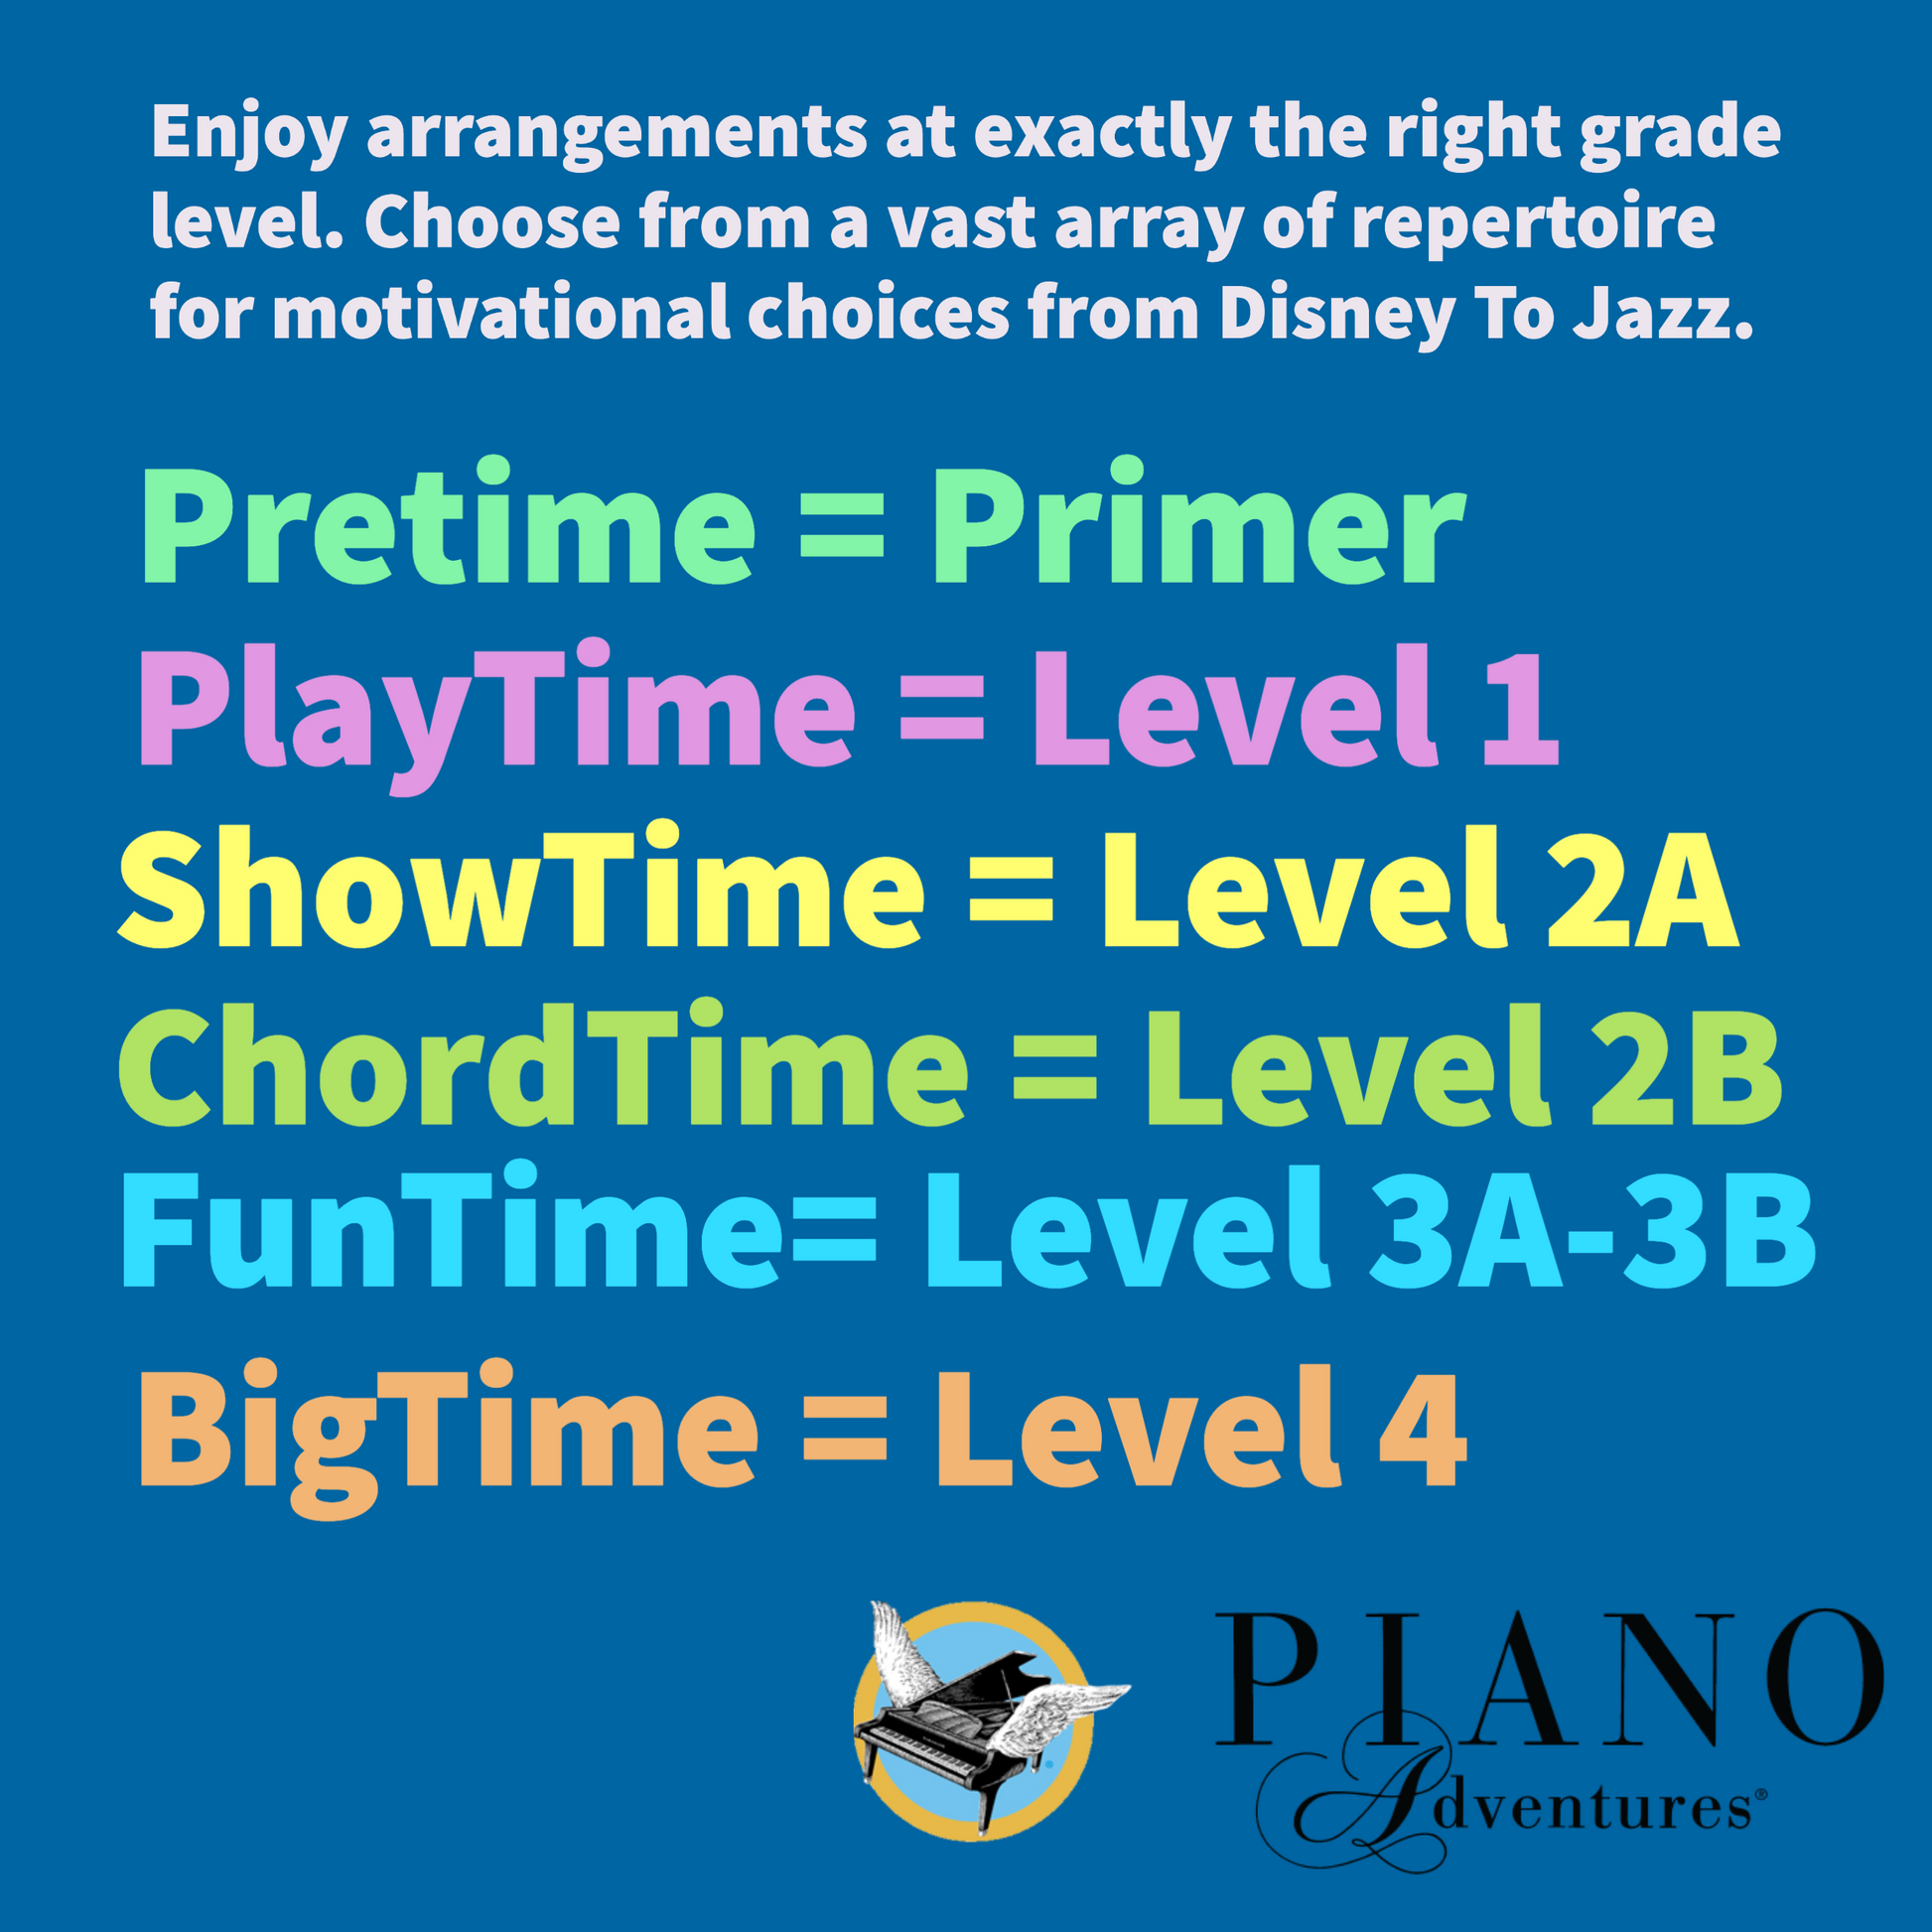 Faber Piano Adventures: Chordtime Hits Level 2B Book & Keyboard